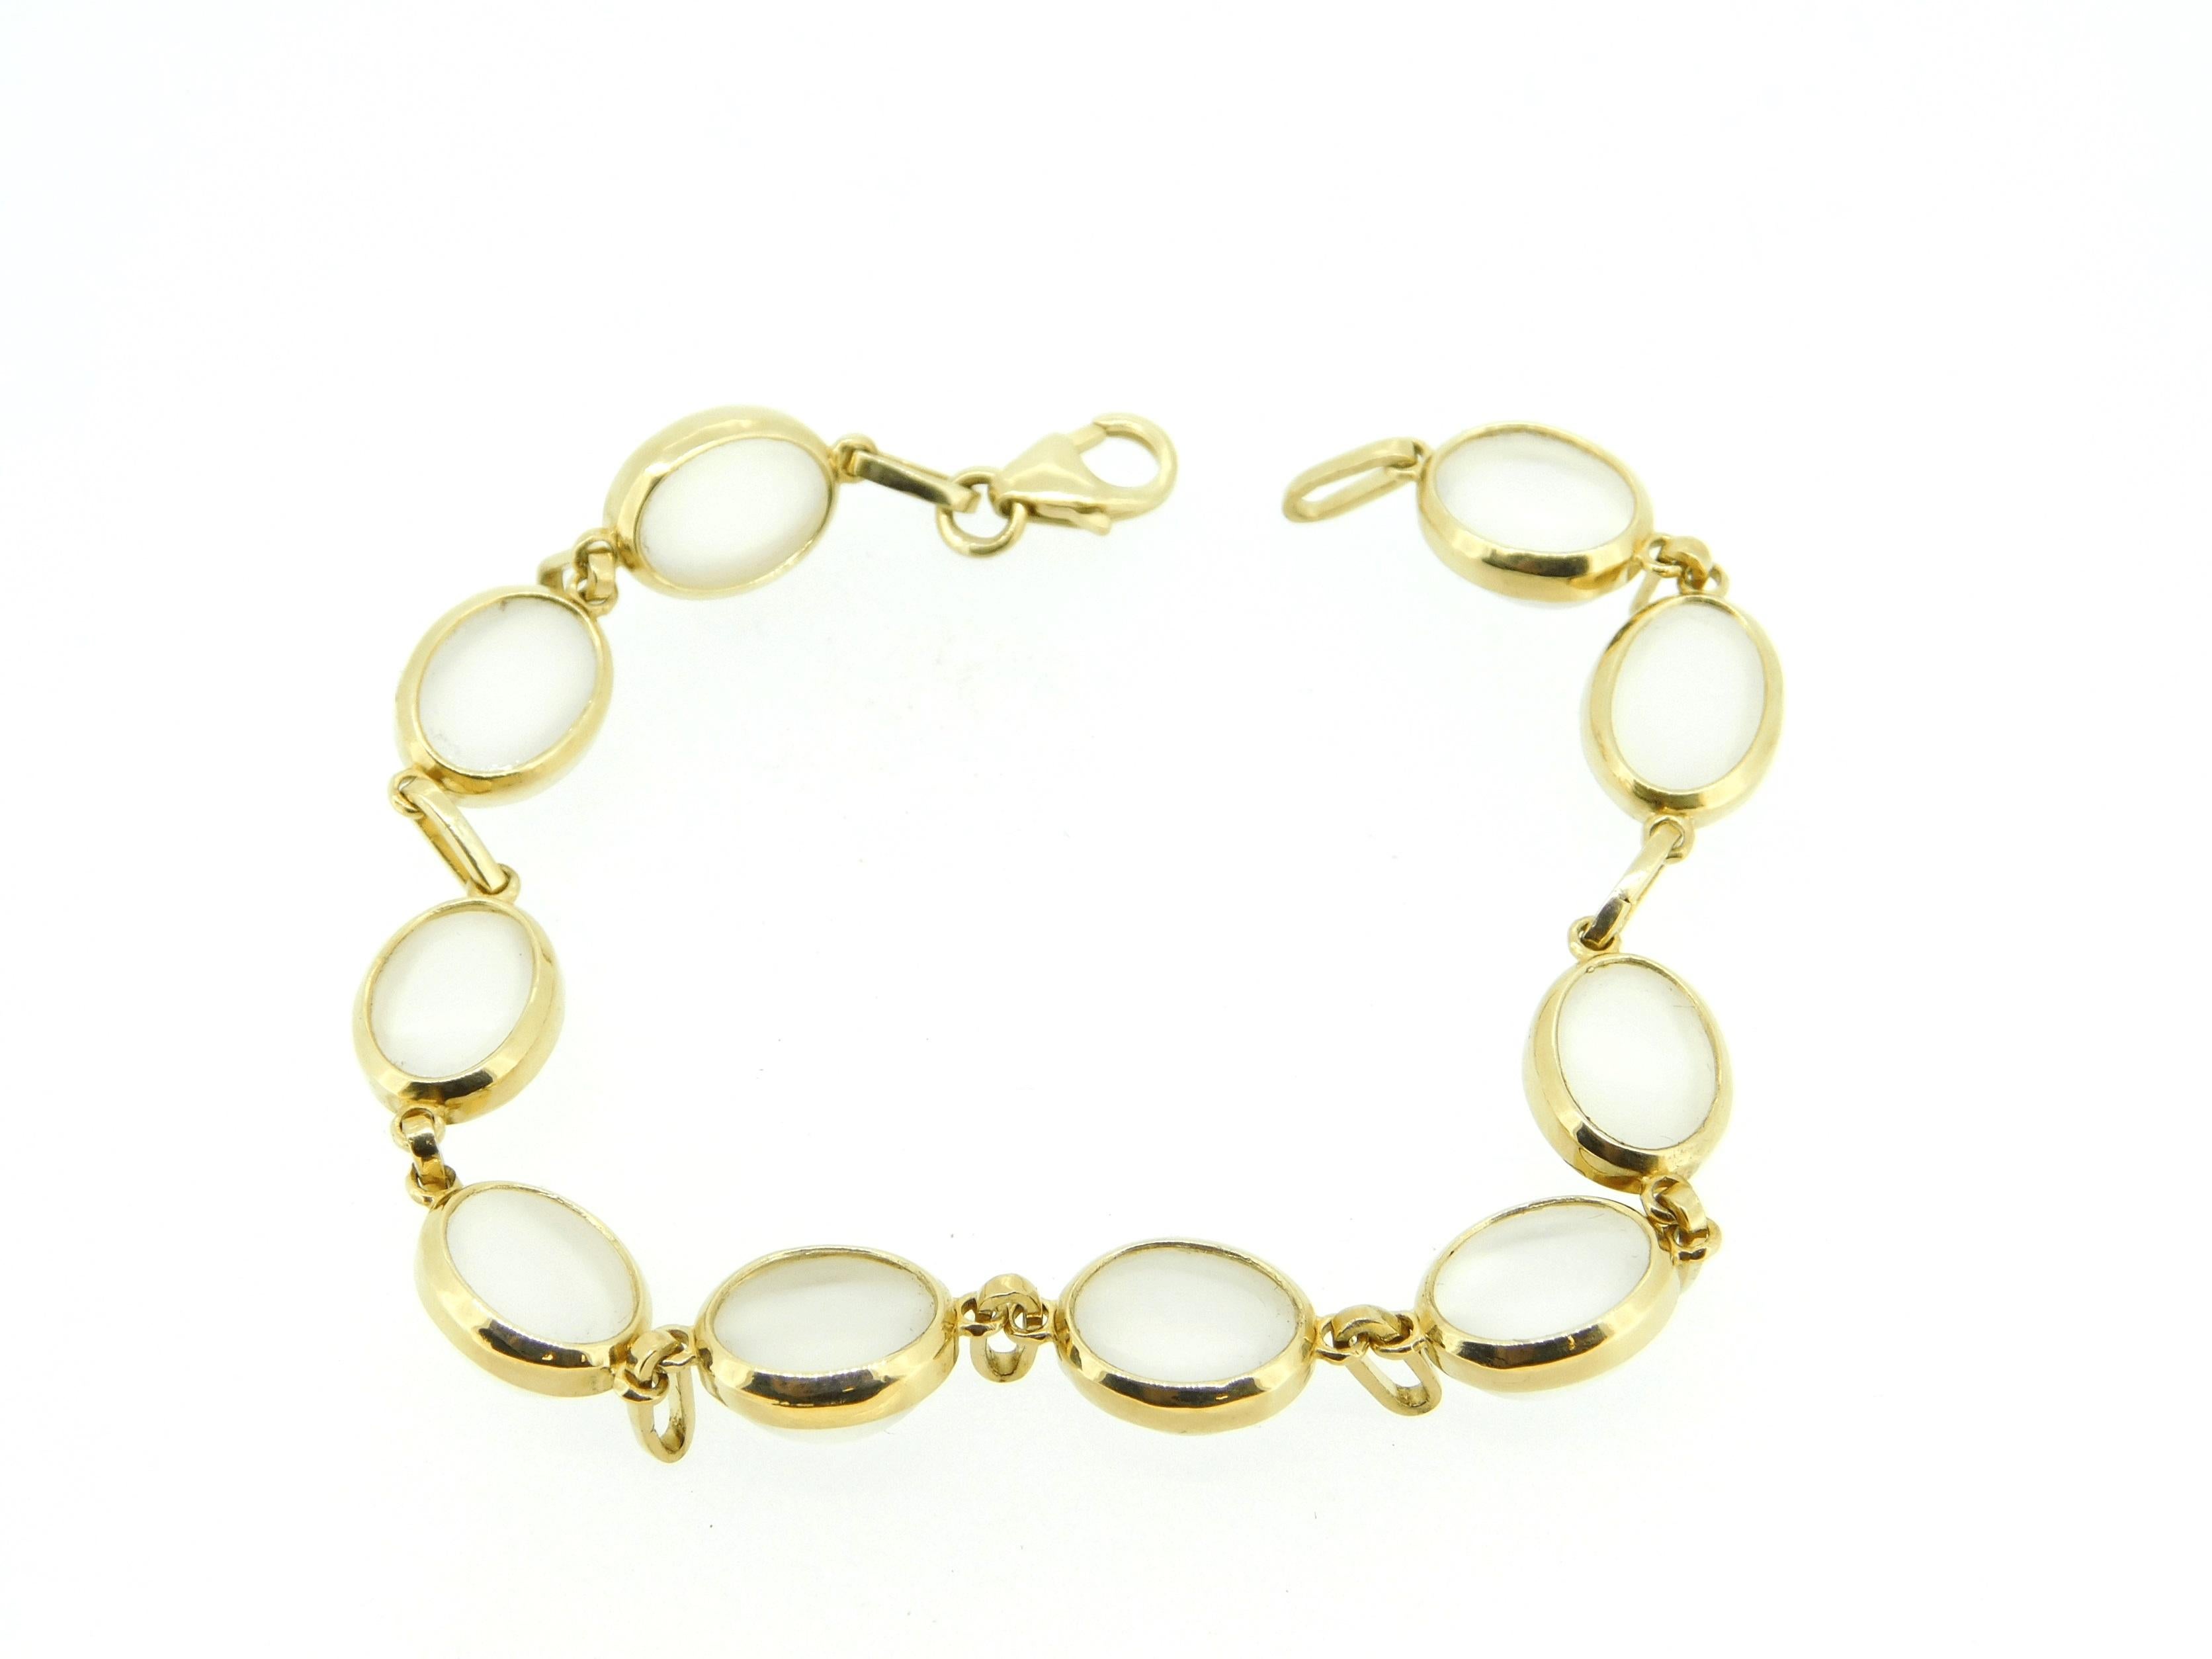 14k Yellow Gold Genuine Natural 23.59ct Moonstone Bracelet (#J4341)

14k yellow gold custom moonstone bracelet. There are ten oval moonstones weighing 23.59 carats total. The moonstones are set in oval bezels with a custom link. The moonstones